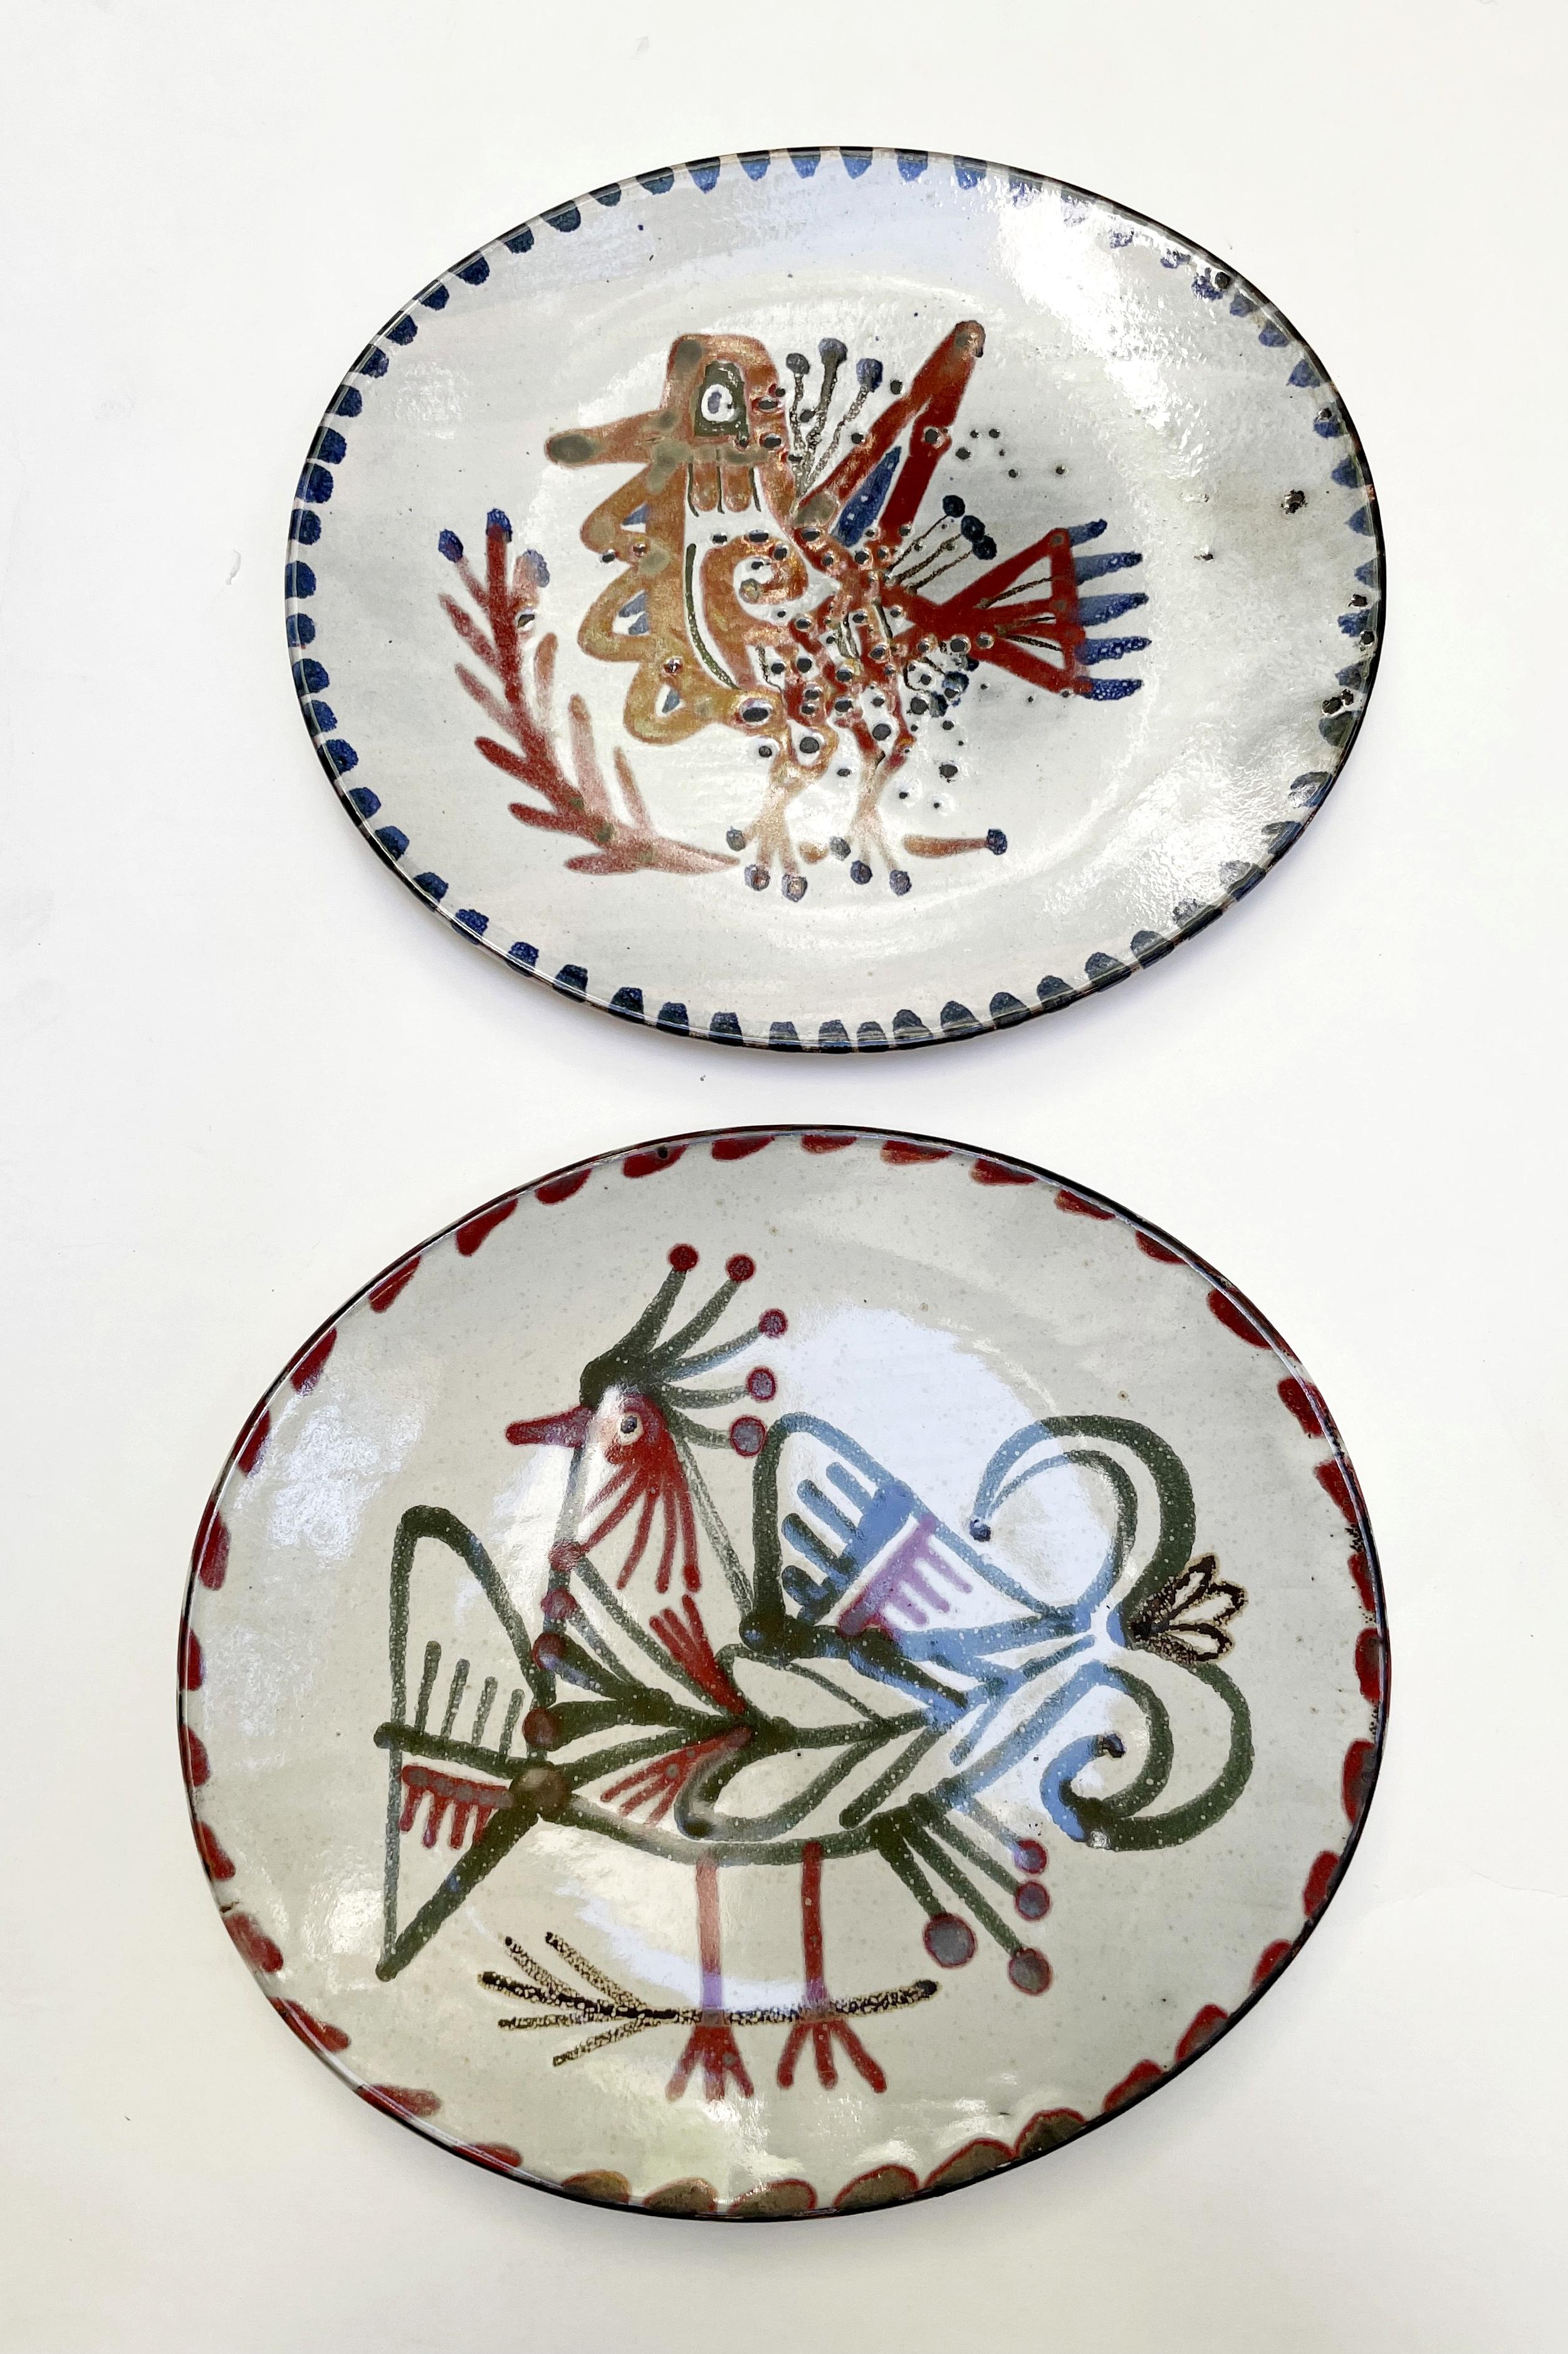 Jean Derval and (1925-2010) and Gustave Reynaud (1915-1972).
Twelve plates decorated with fantastic birds and fish.

Gustave Reynaud is documented in 1956 in Vallauris; he founded the Le Murier pottery, and there sold table services based on the